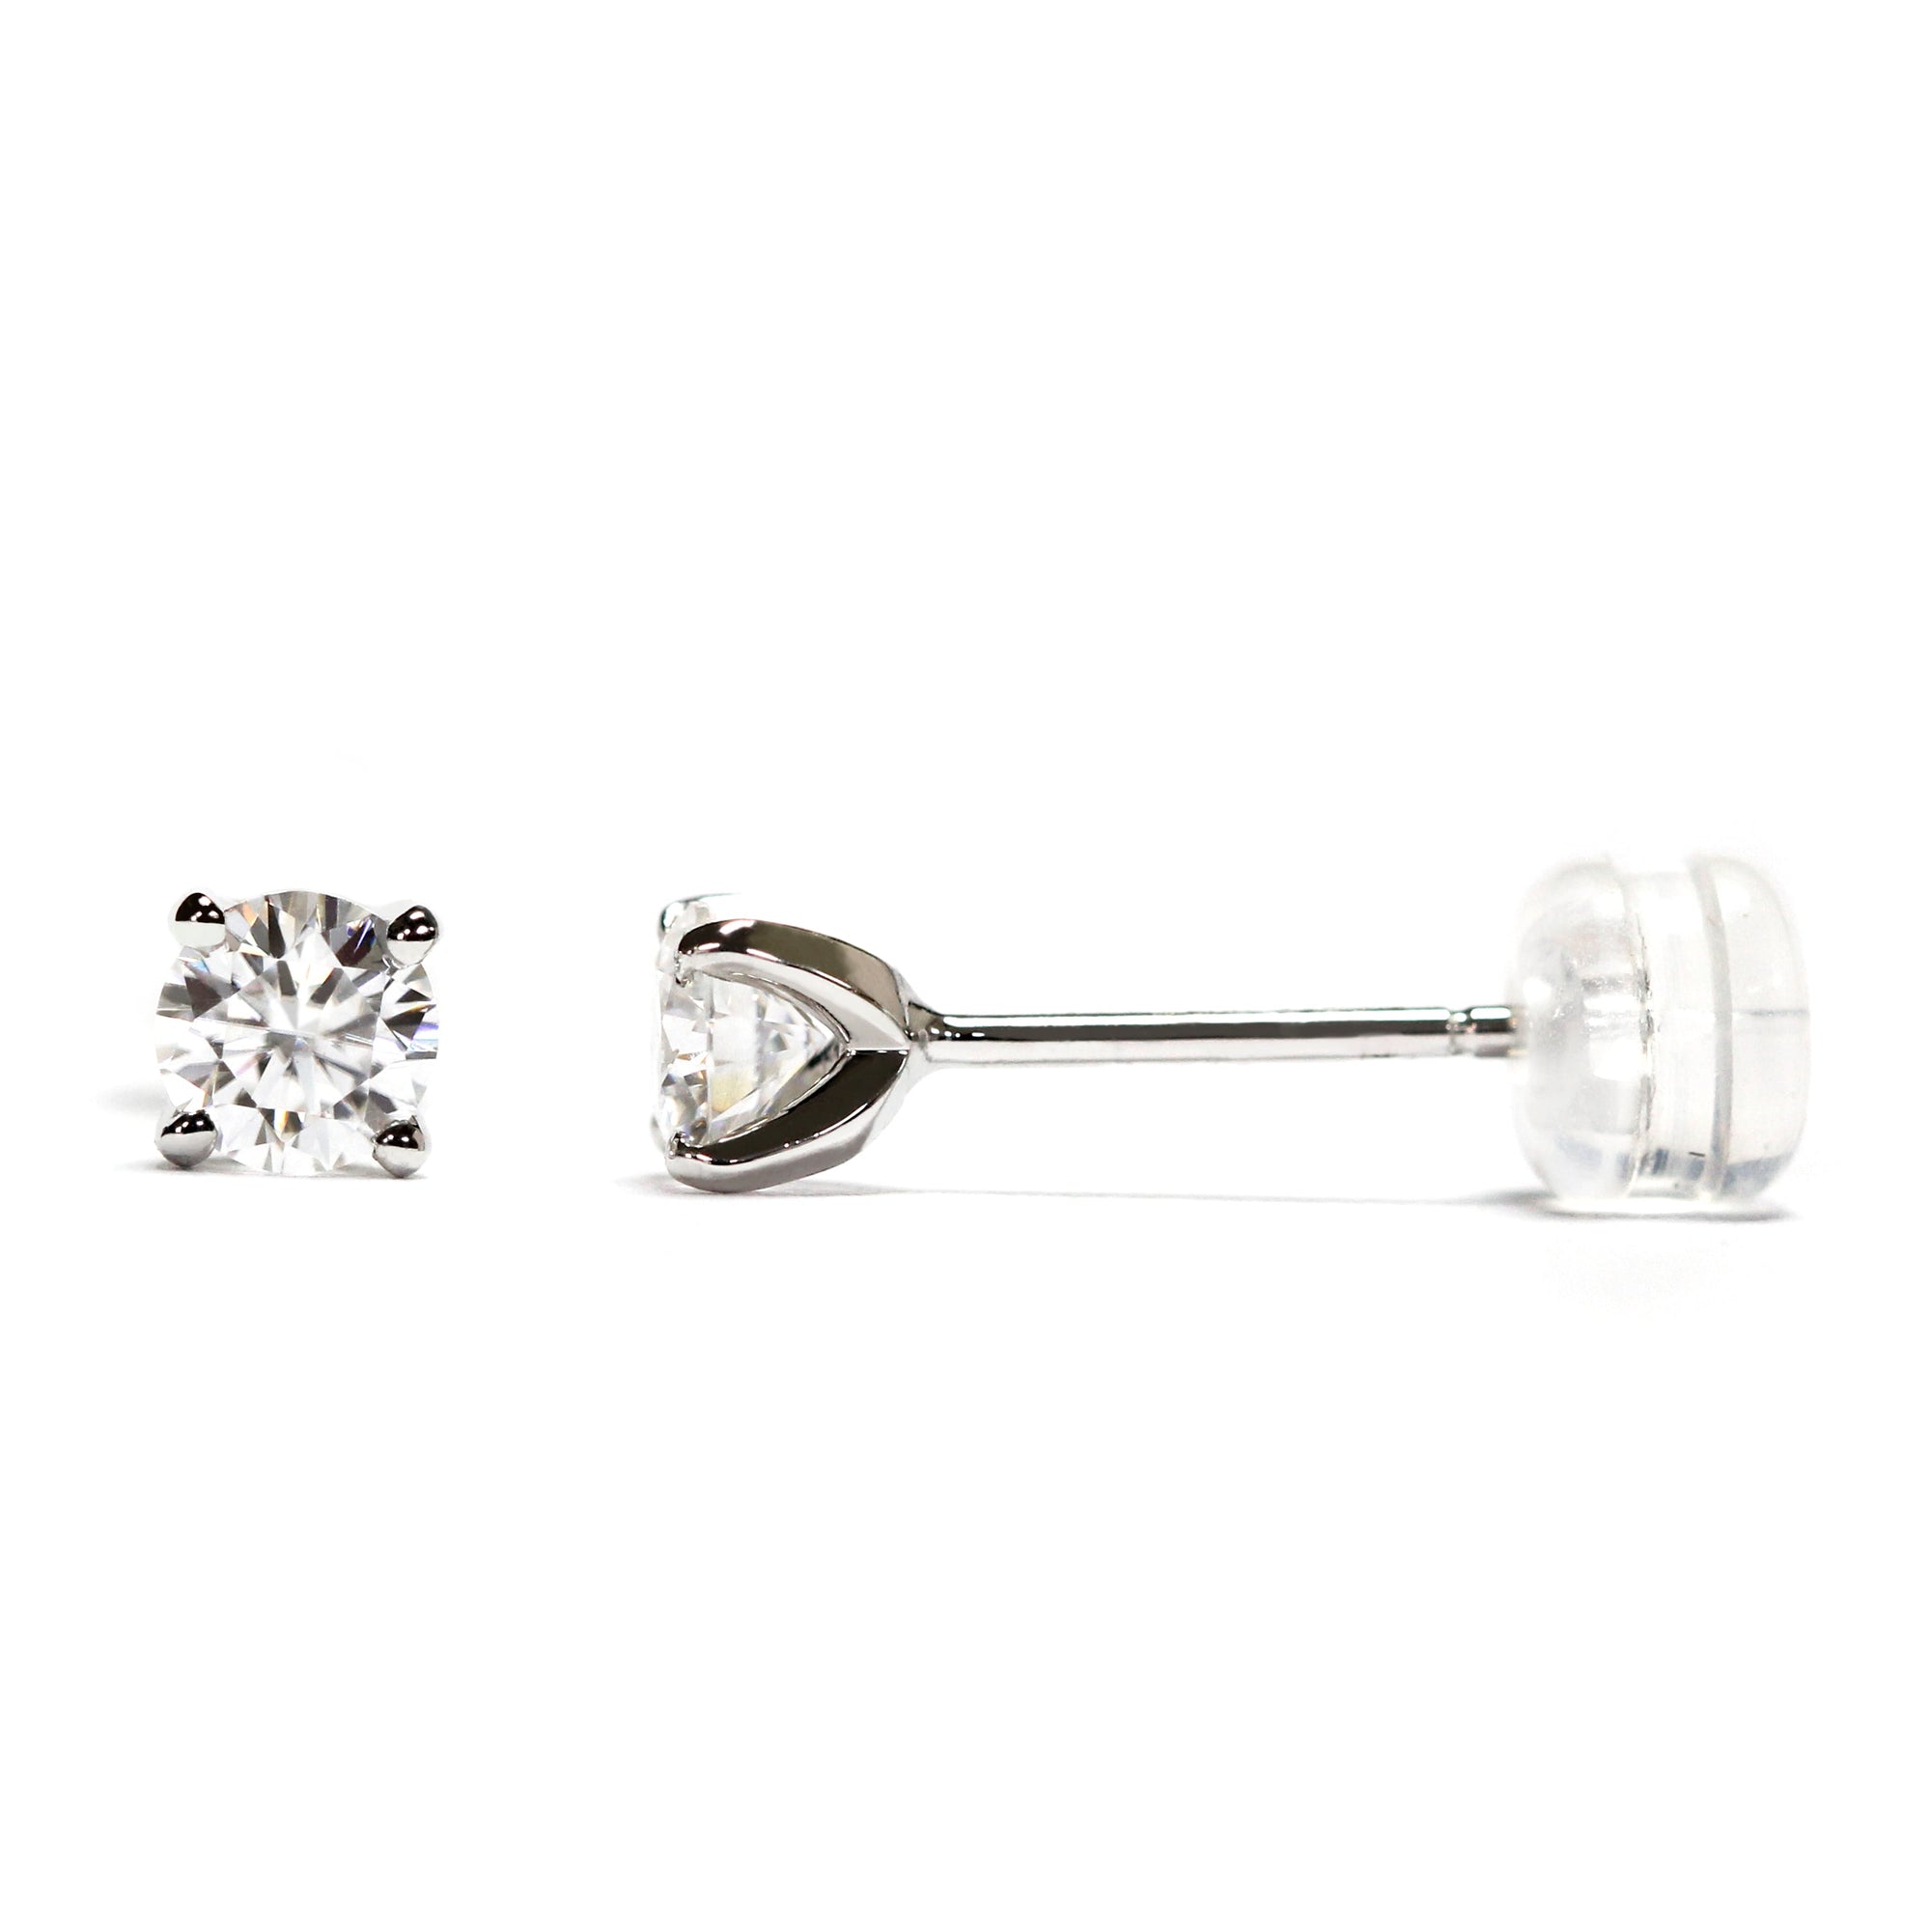 Ready Made | 0.3 Carat Round Moissanite Earrings in 18K White Gold with Soft Silicone Gold Insert Backings - LeCaine Gems